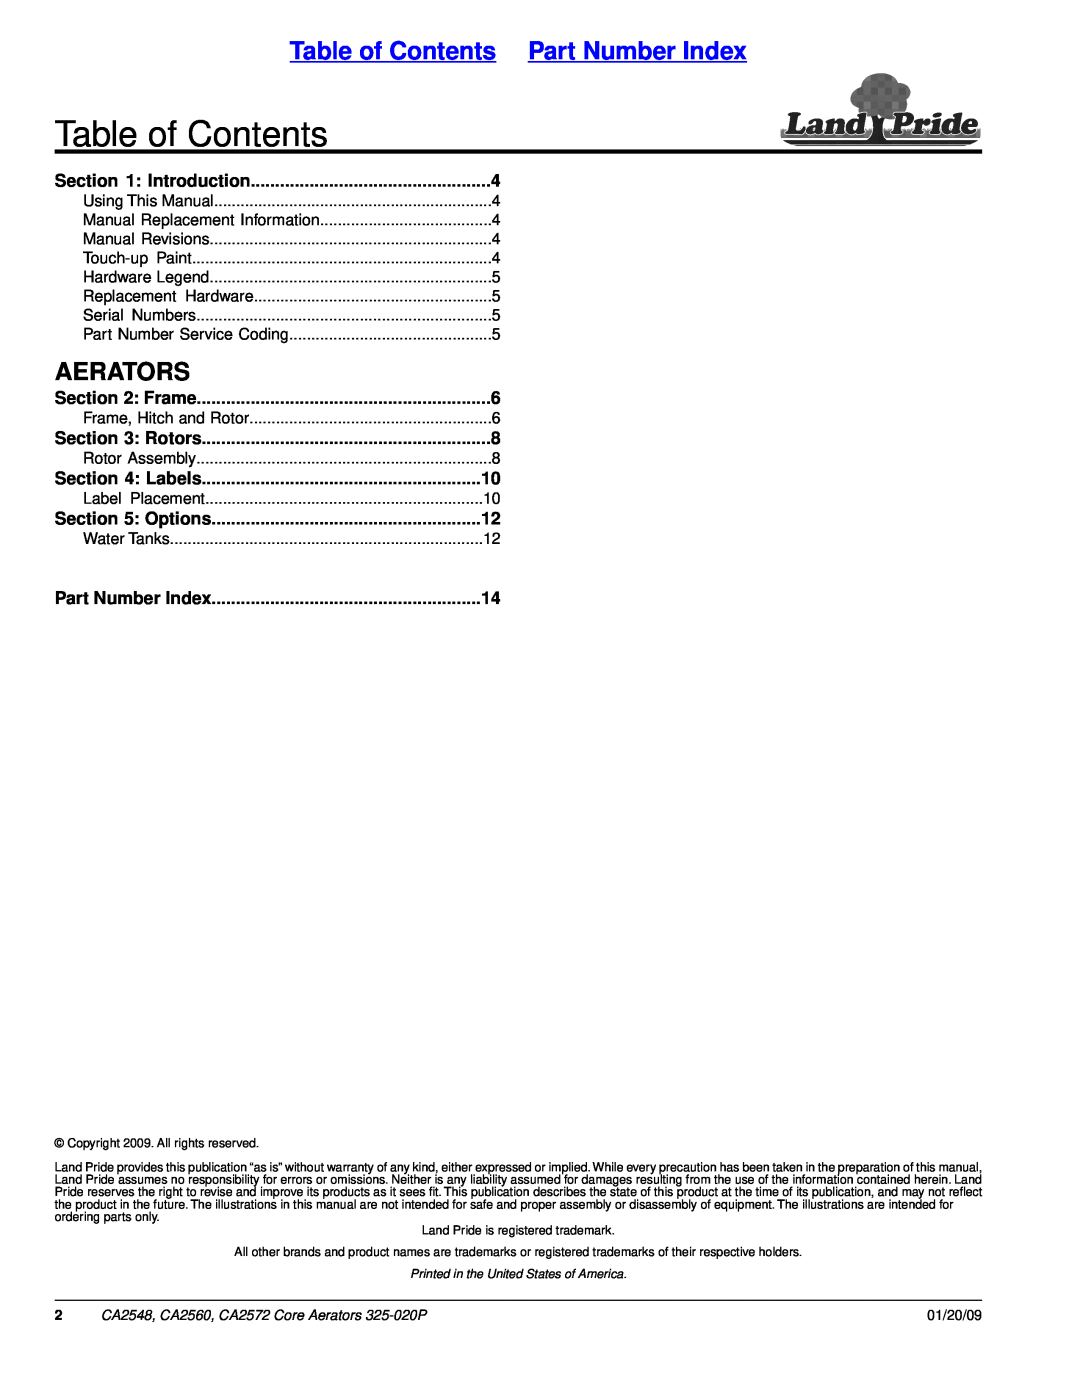 Land Pride CA2548, CA2572 Aerators, Table of Contents Part Number Index, Introduction, Frame, Rotors, Labels, Options 